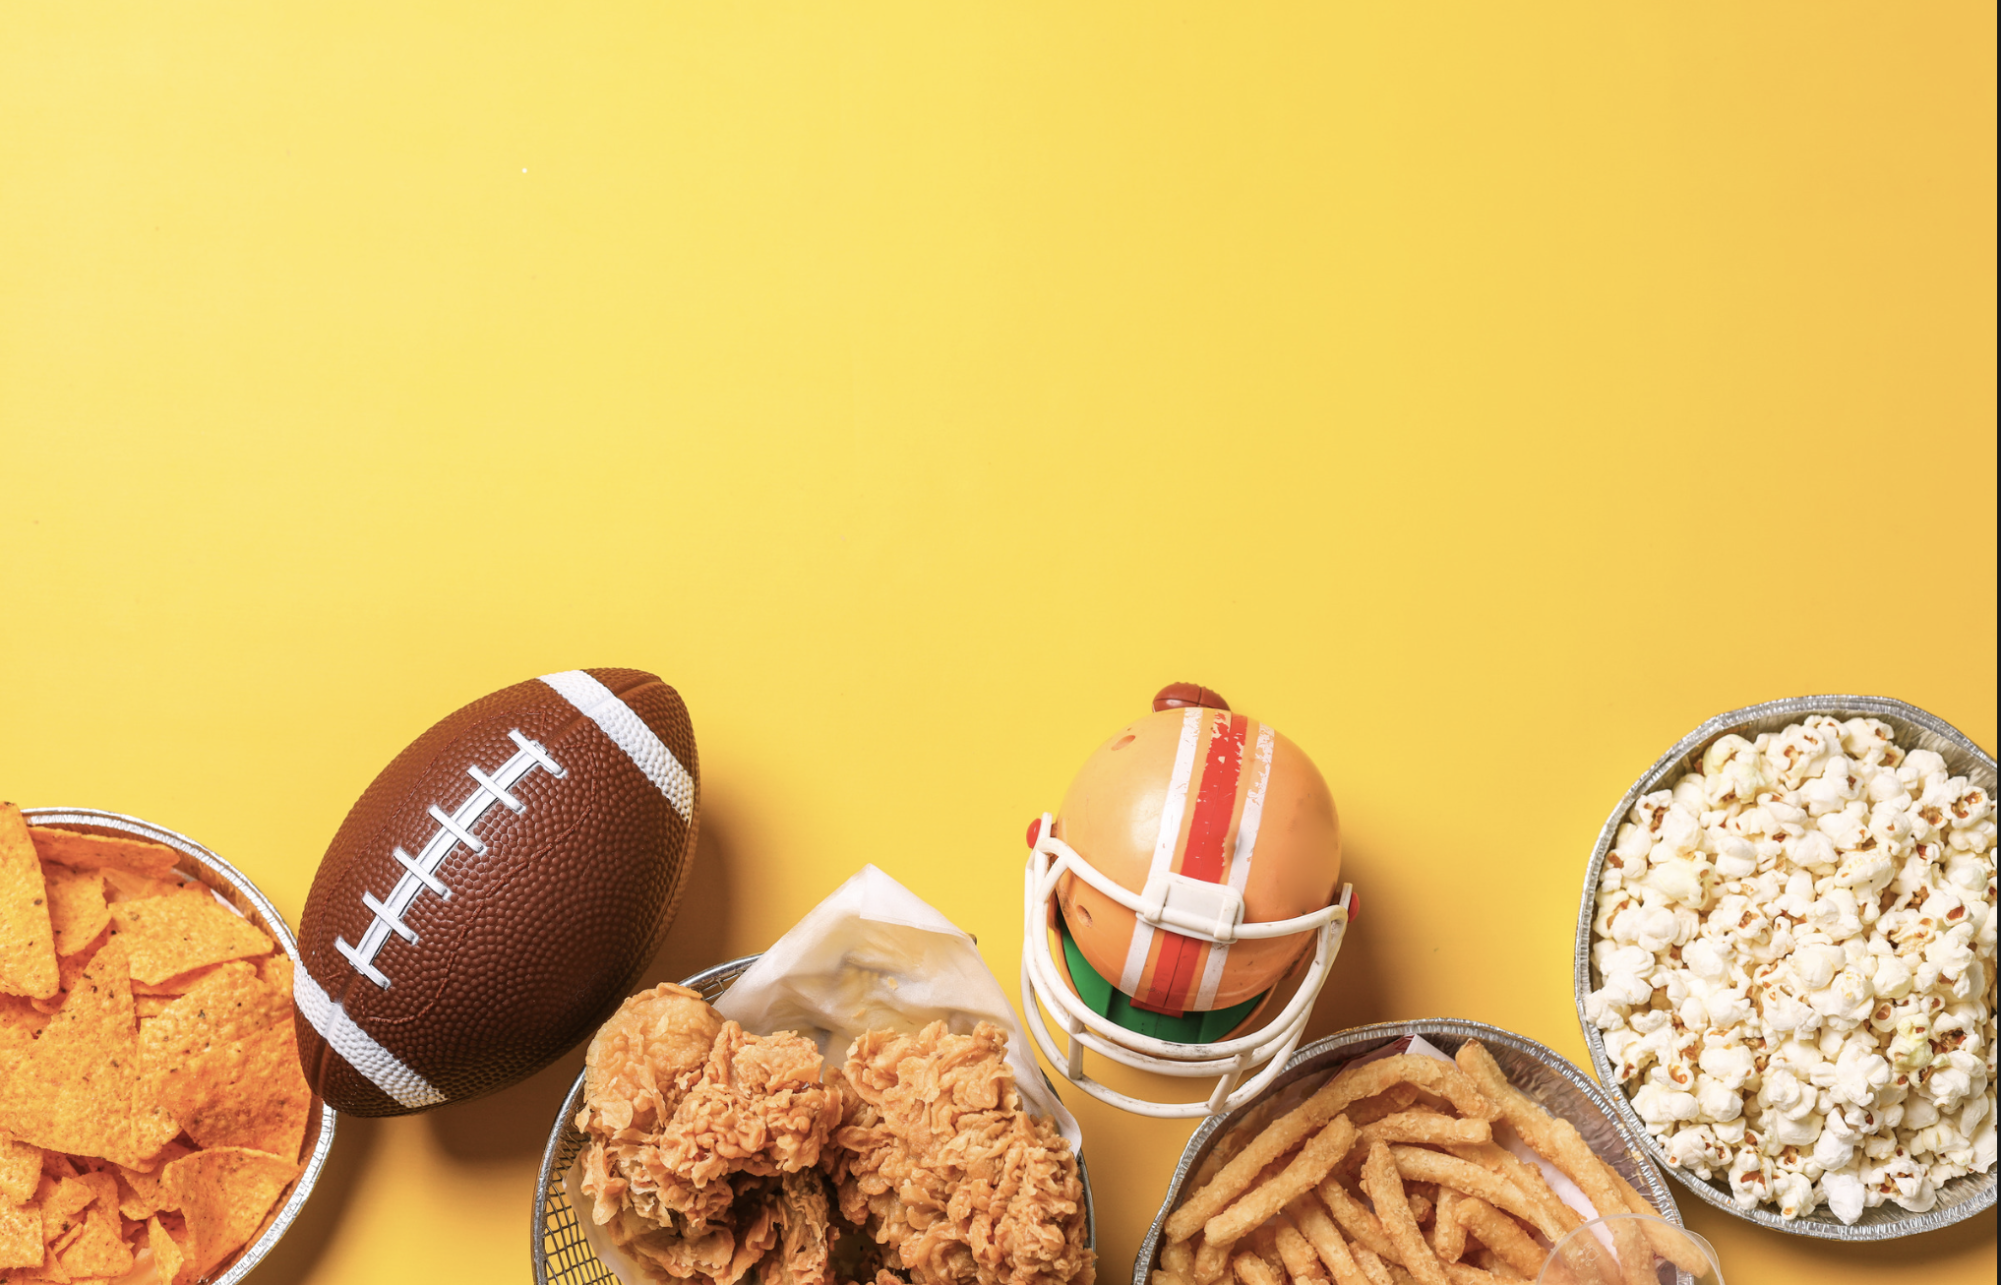 Fun Super Bowl Activities to Enhance Your Game Day Experience